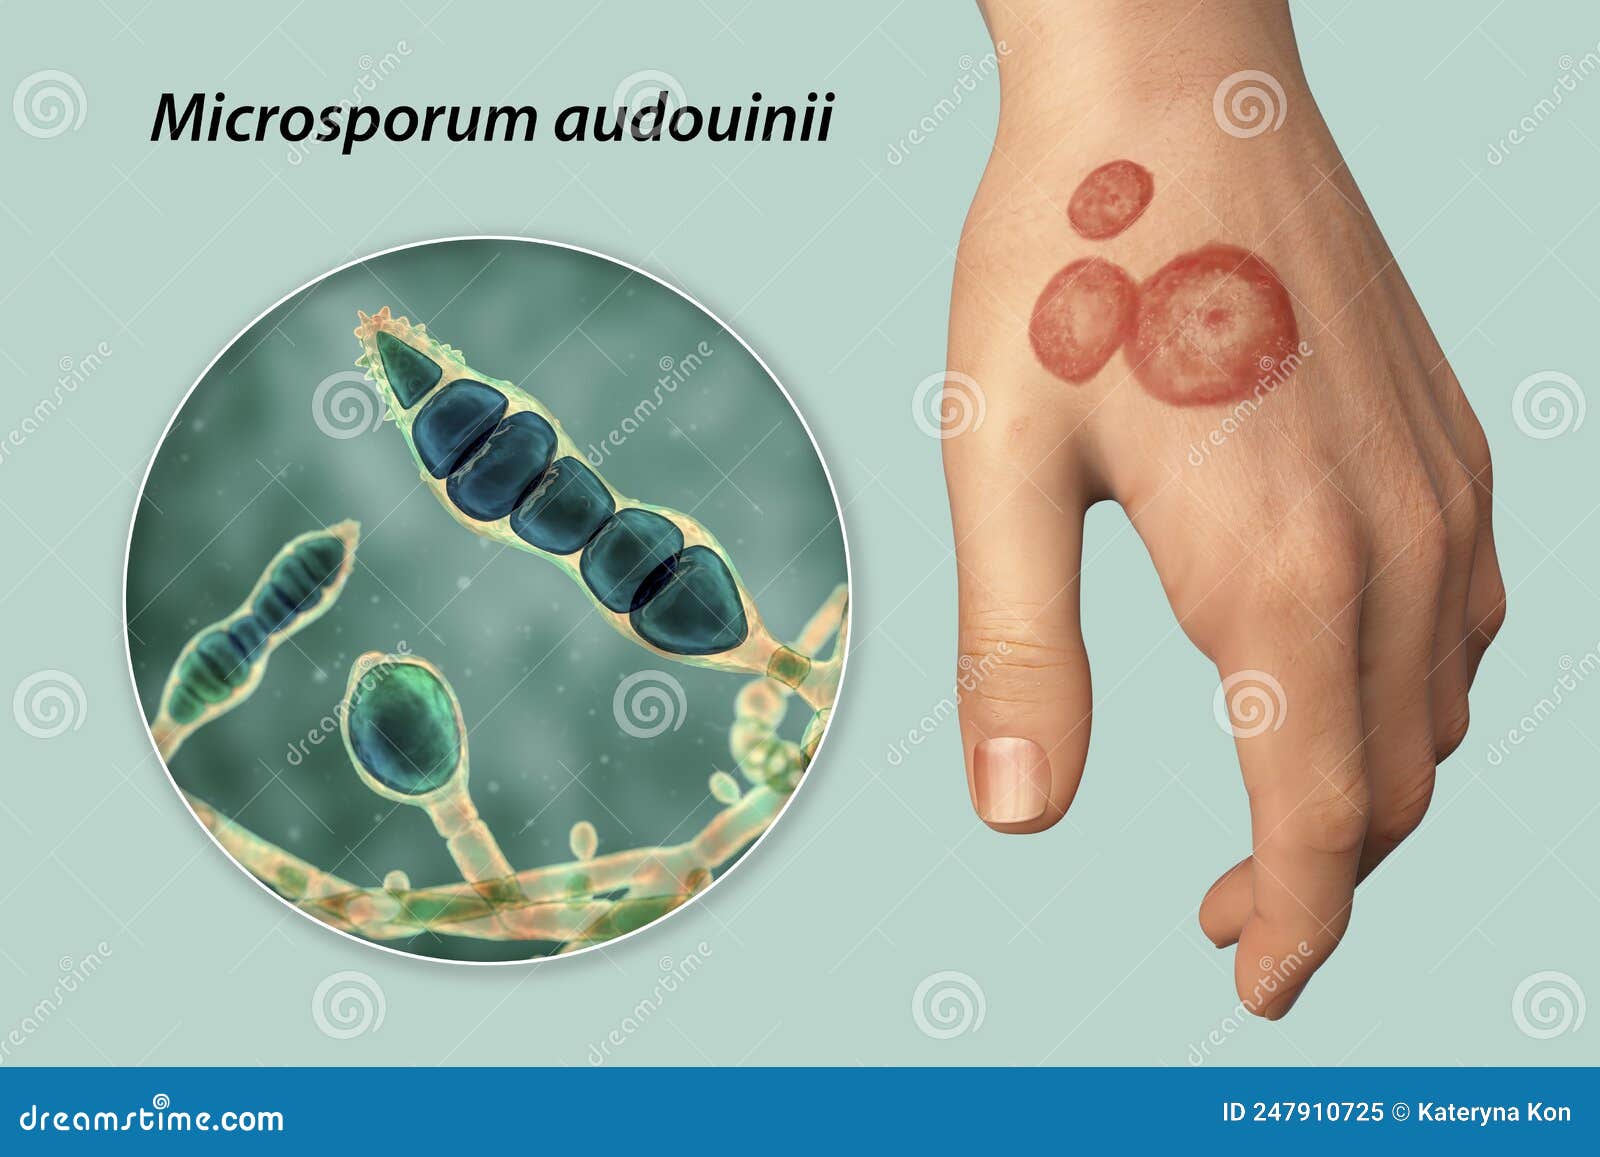 Hand Fungal Infection, Tinea Manuum, 3D Illustration Stock Illustration -  Illustration of human, microscopy: 247910725